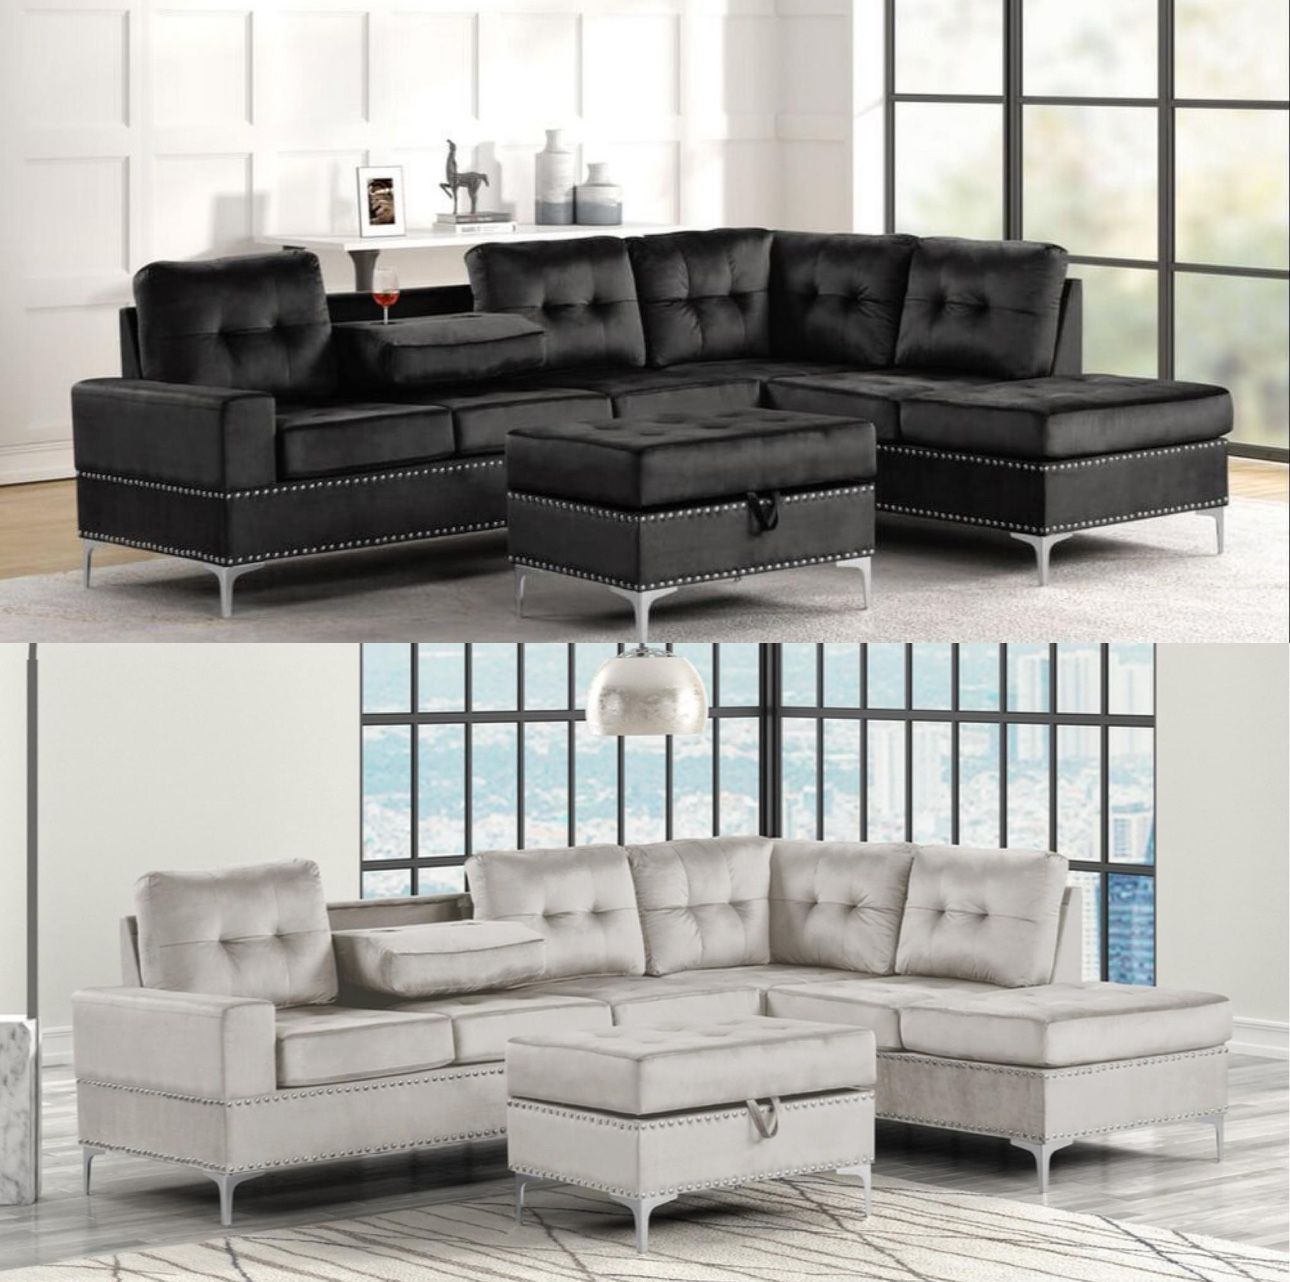 NEW SECTIONAL WITH OTTOMAN AND FREE DELIVERY 